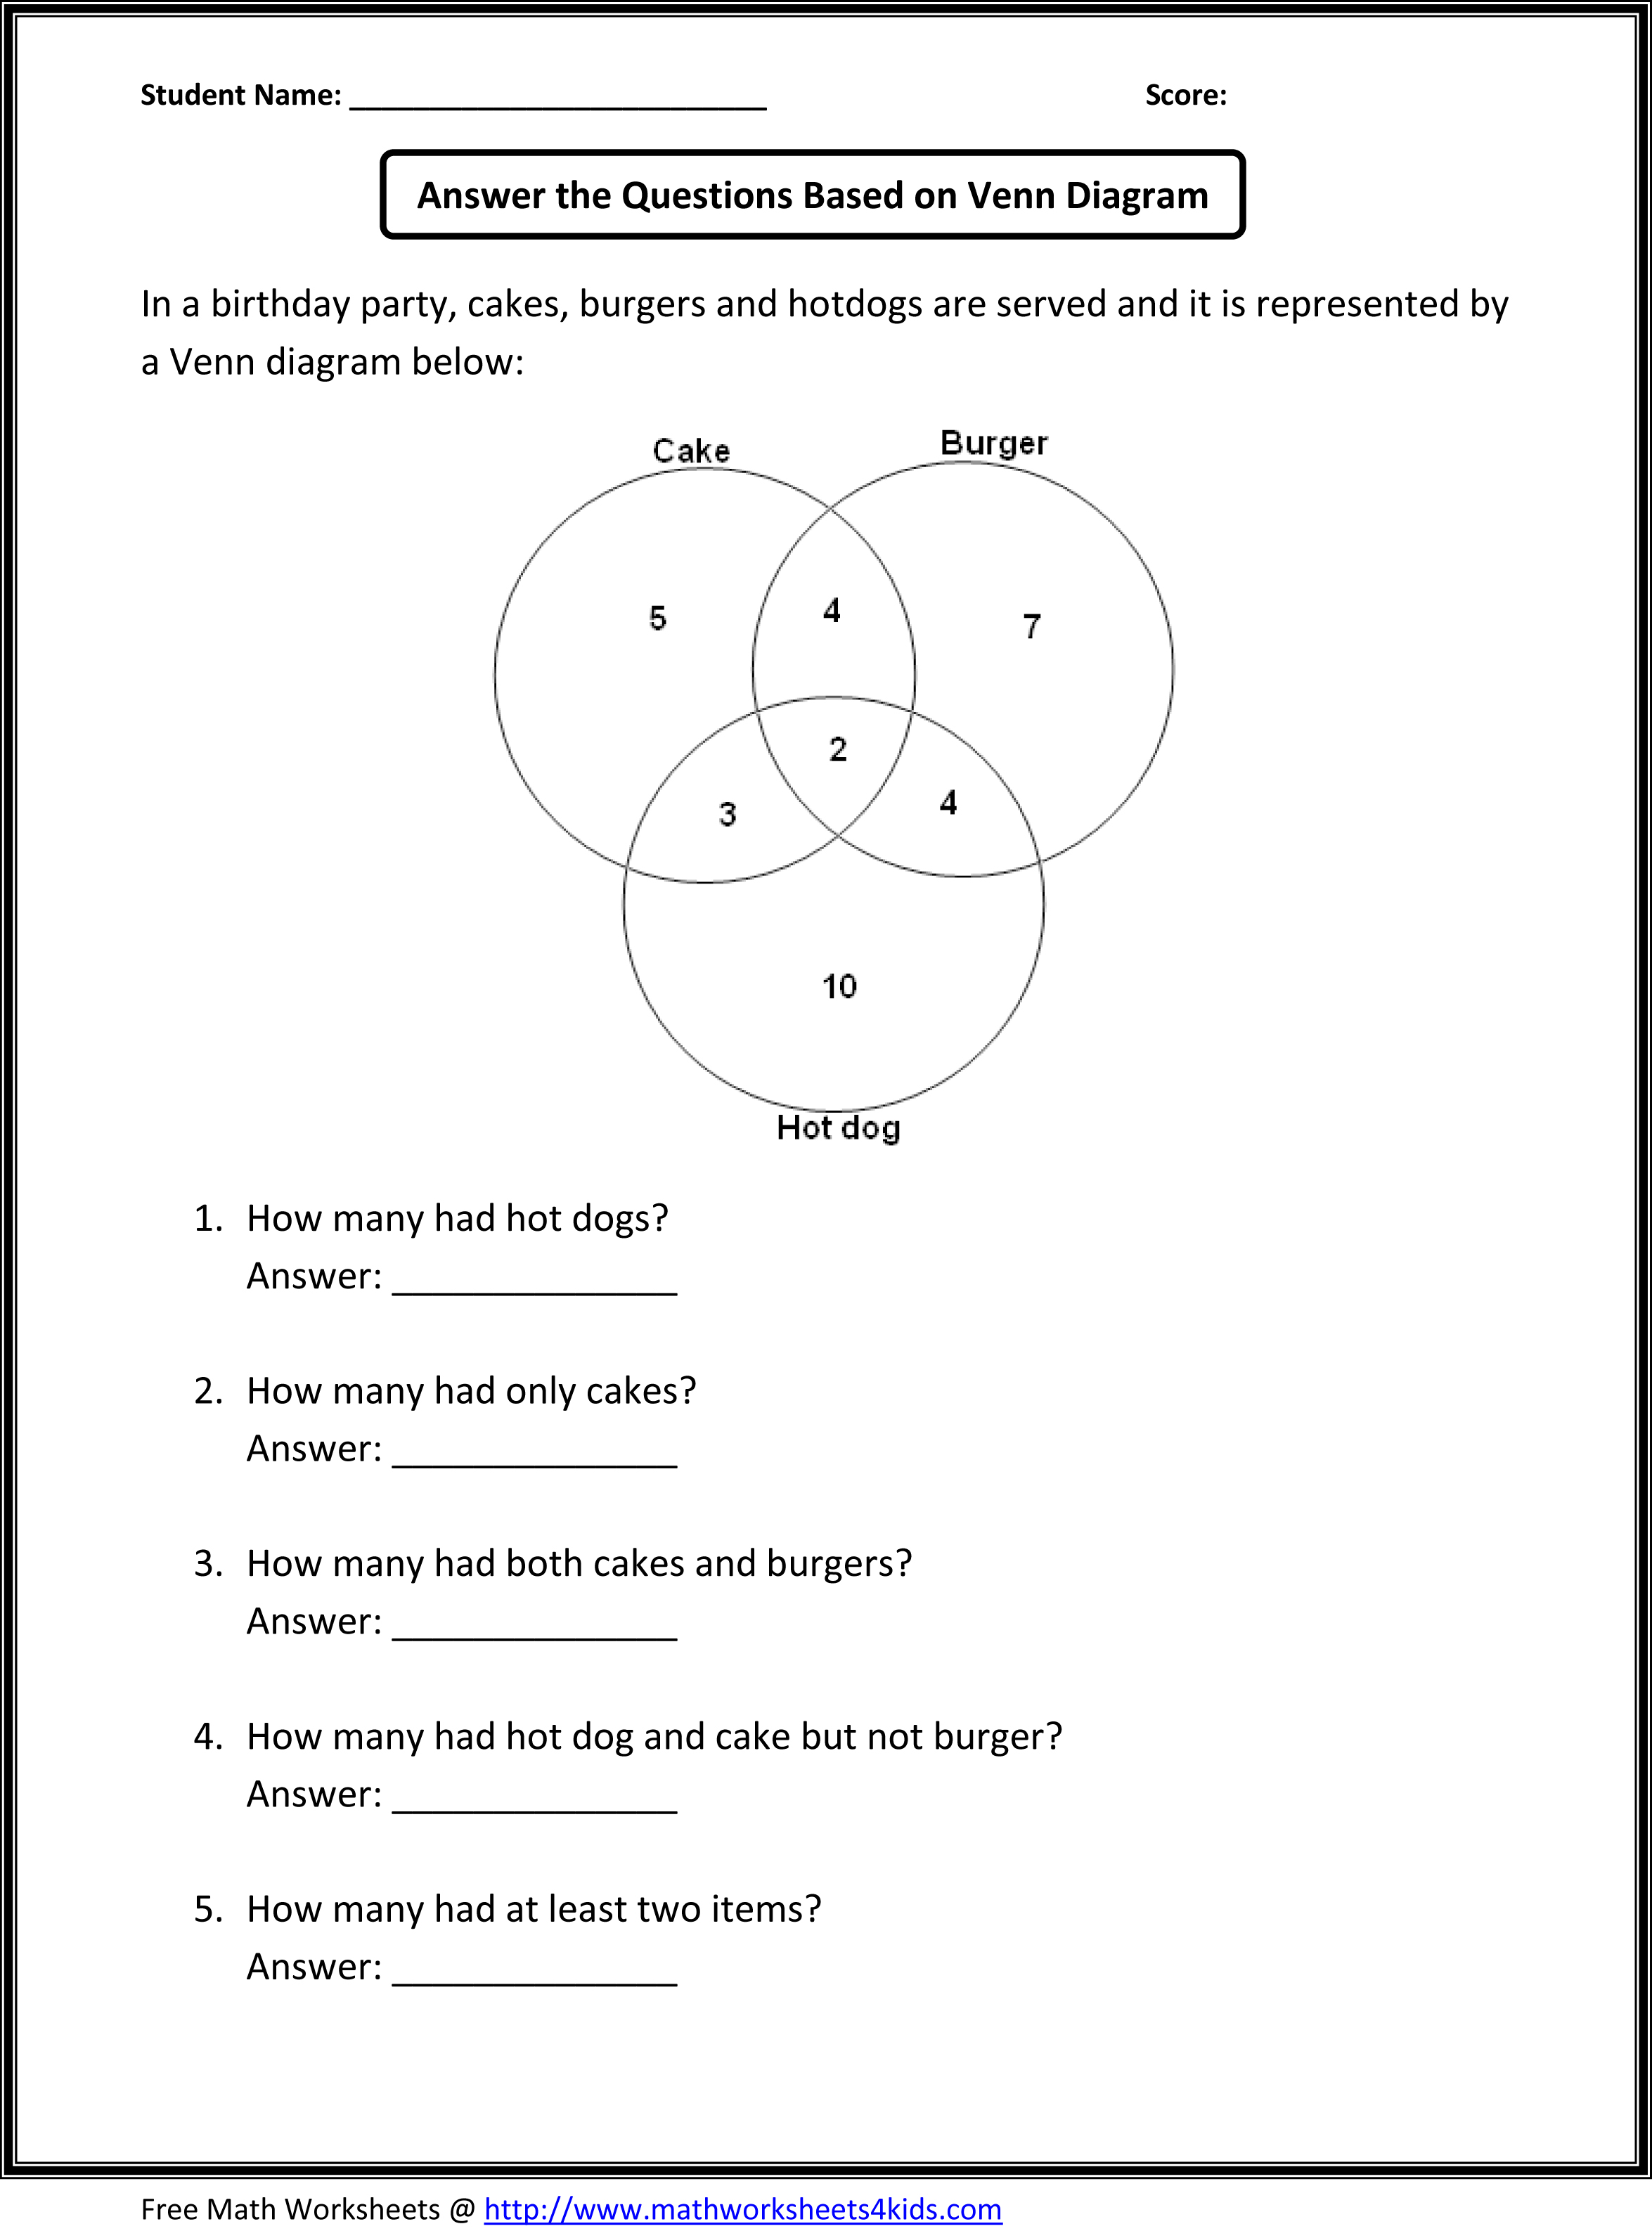 14 Best Images of Finding The Introduction Worksheet - 2nd ...